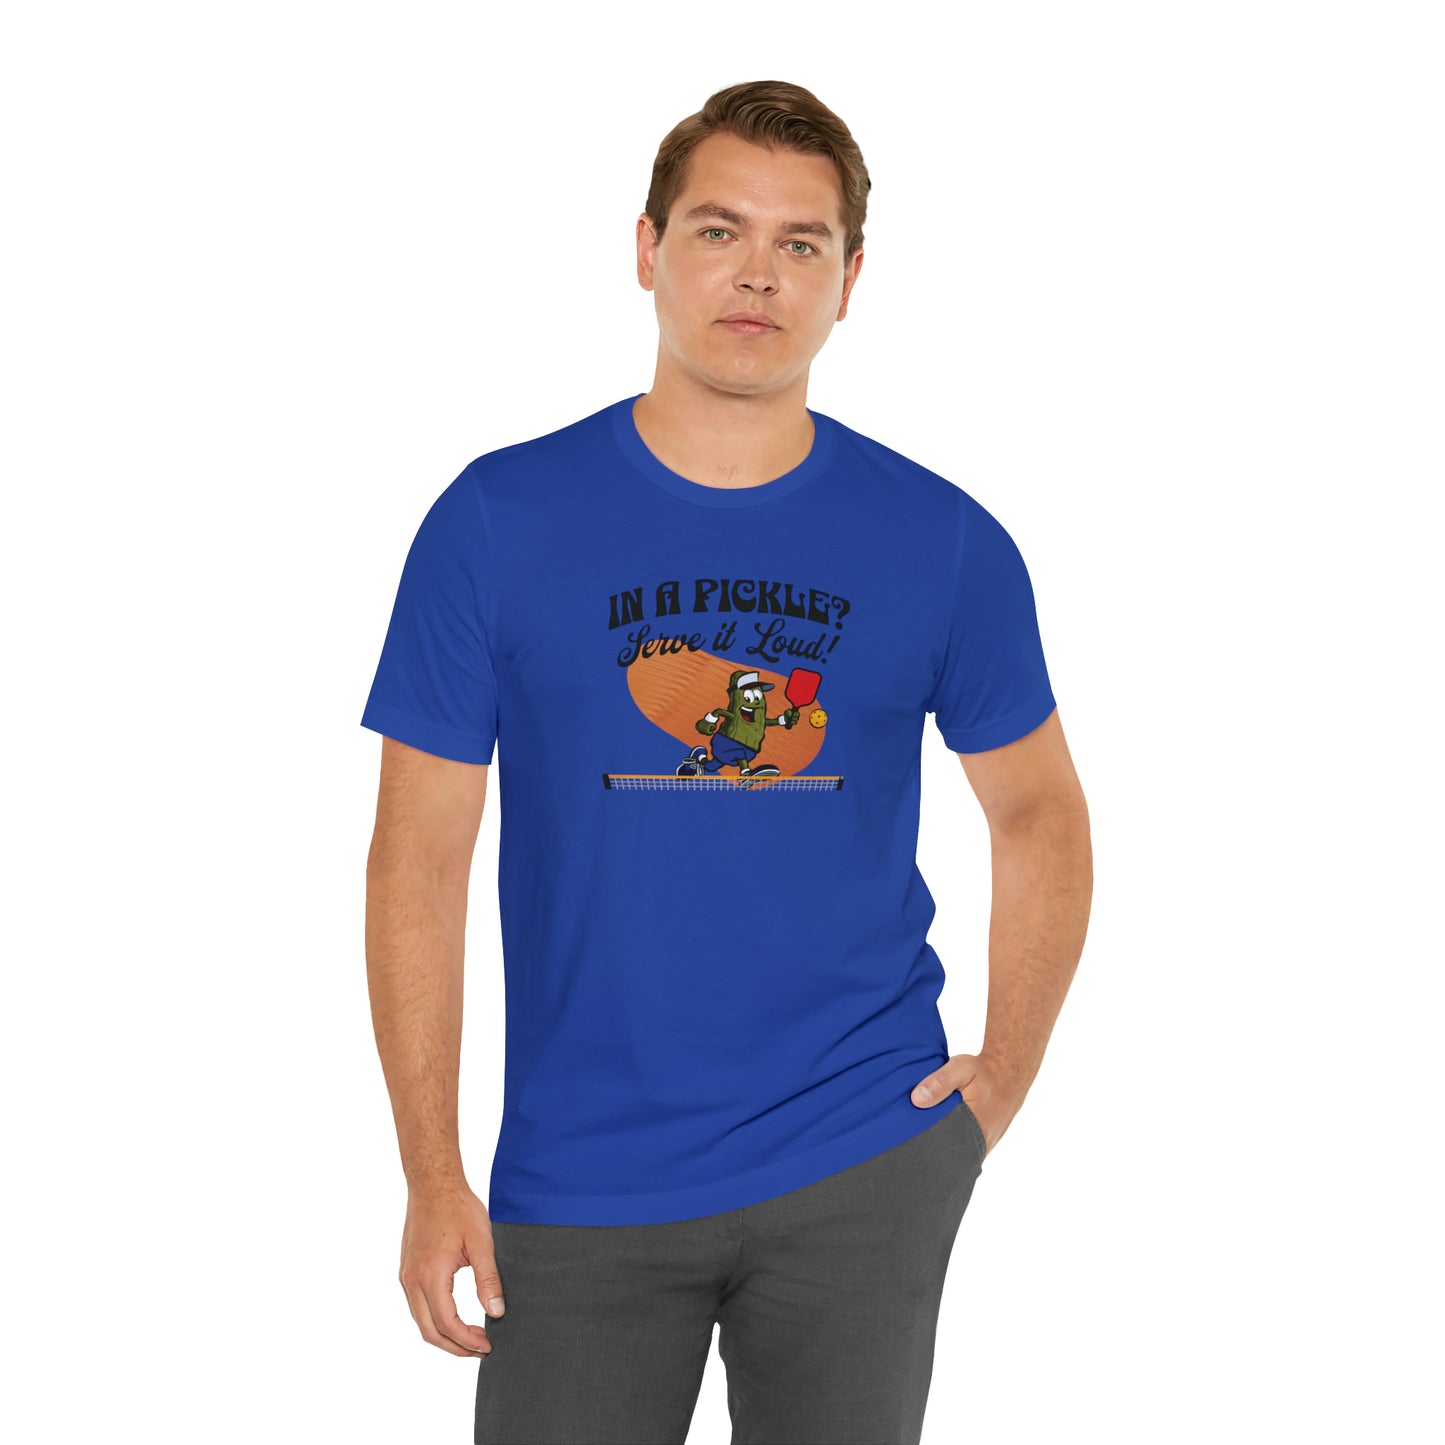 Pickleball Passion T-Shirt: In a Pickle? Serve it Loud!